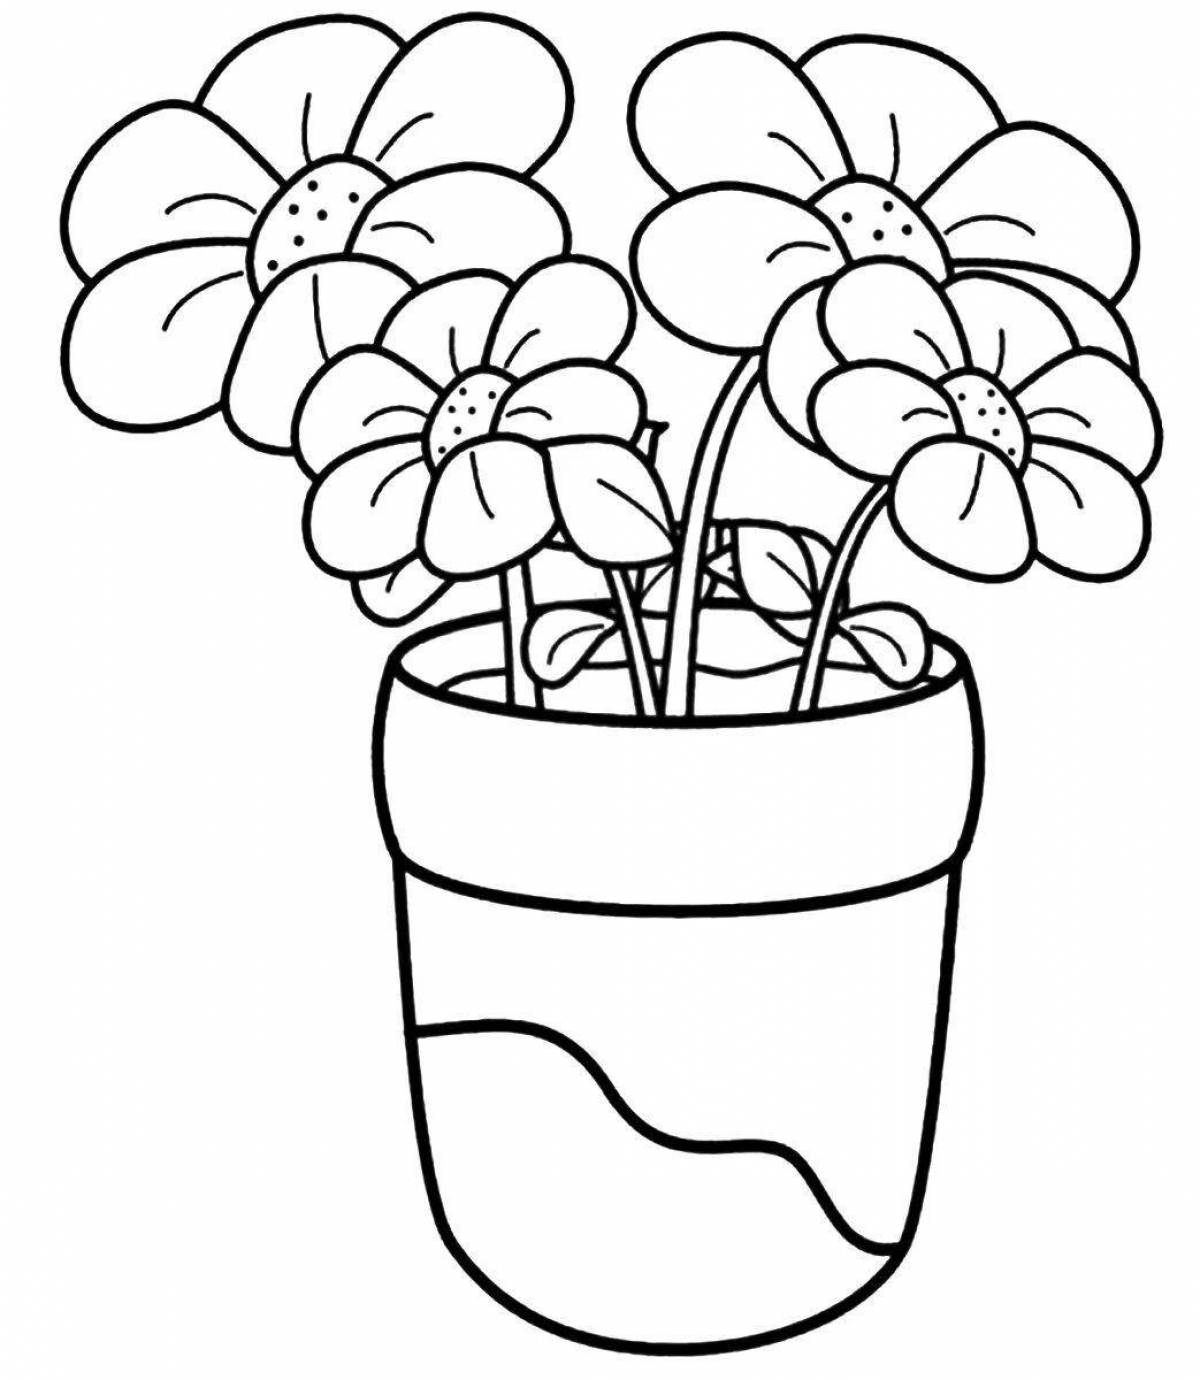 Bright indoor flowers coloring for kids